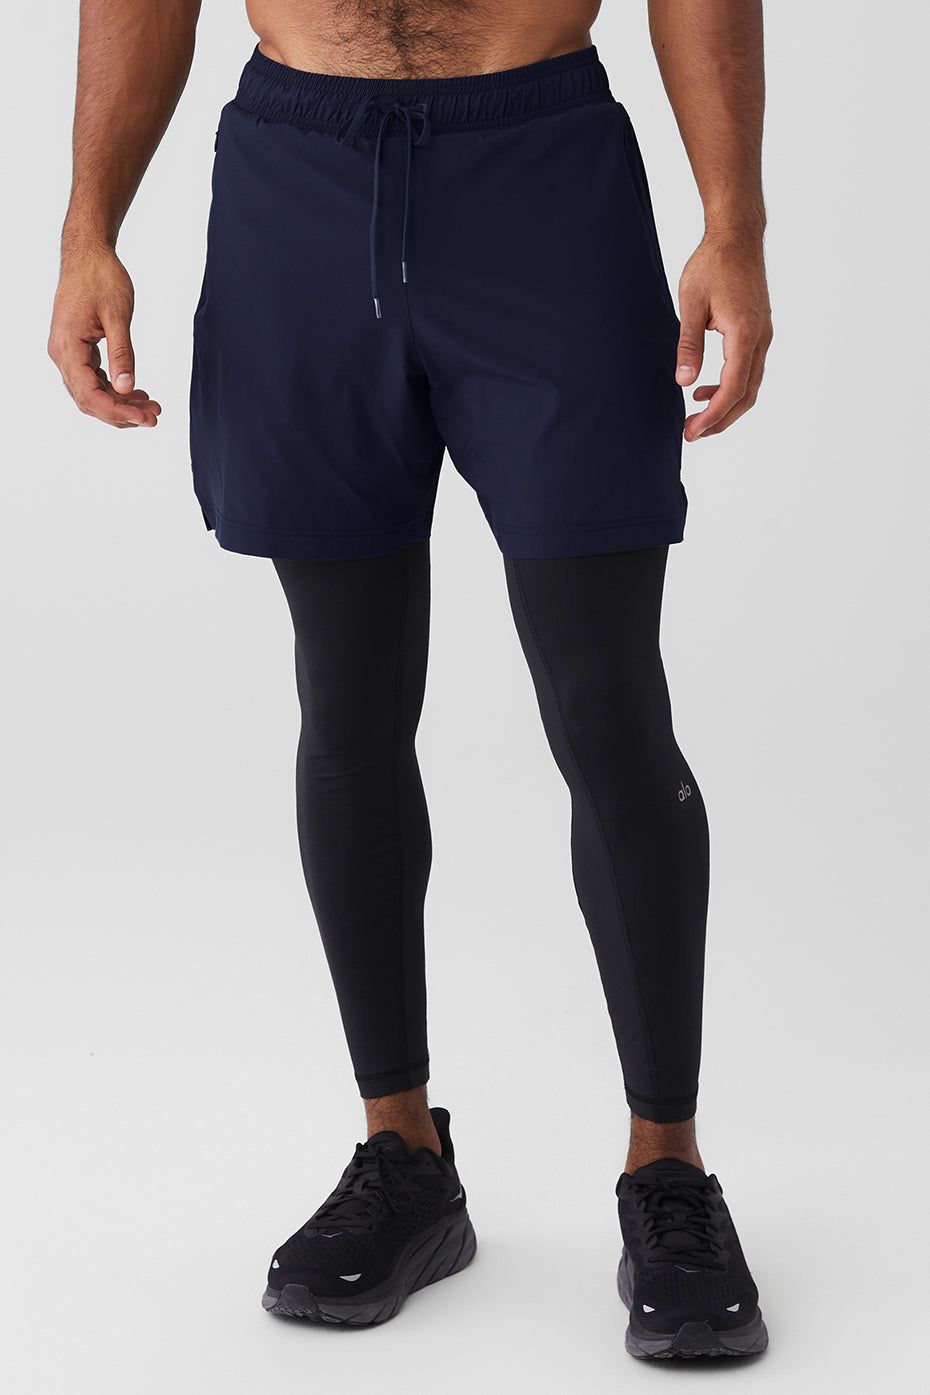 Stability 2 In 1 Pant - Navy/Black